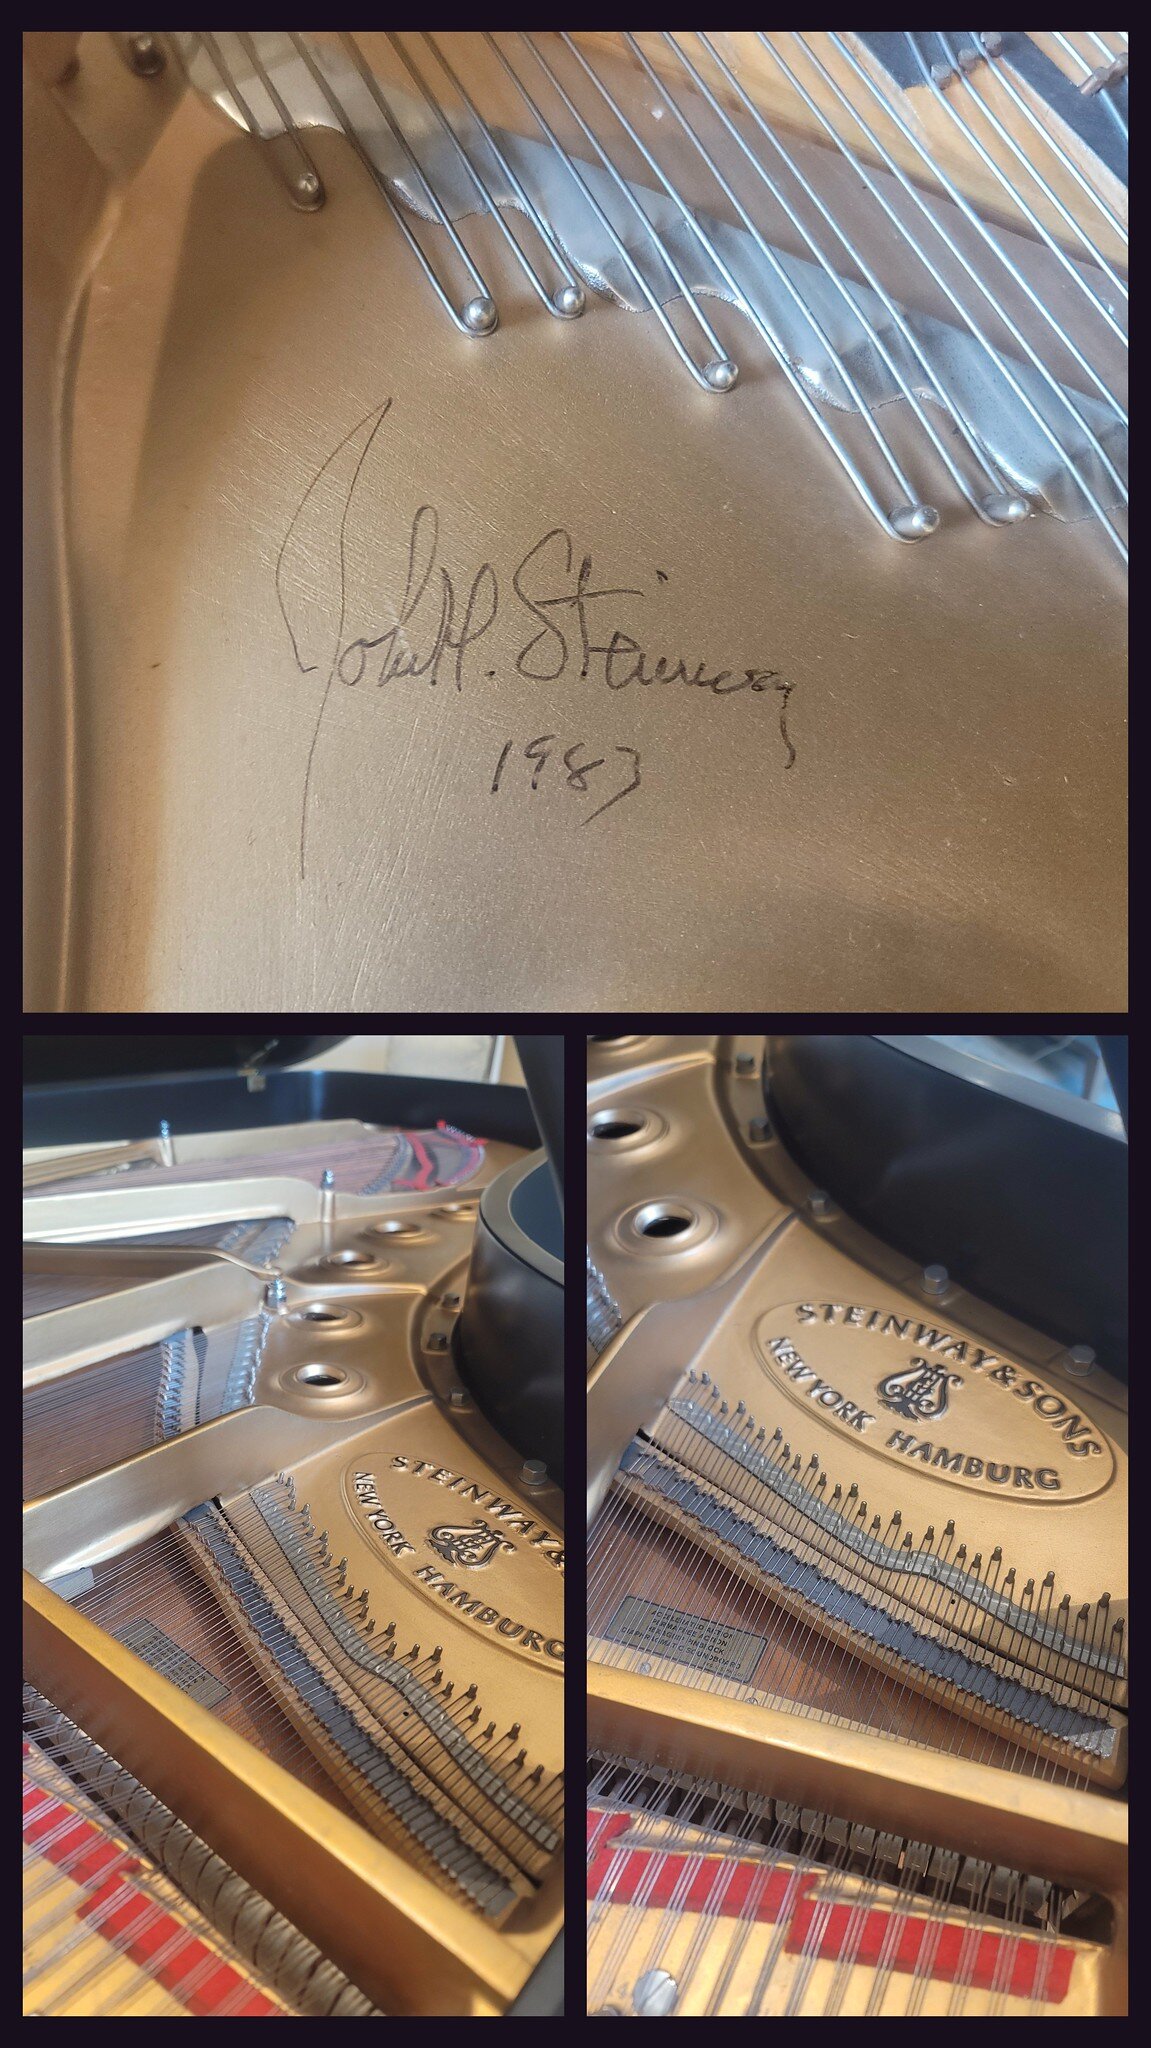 Steinway autographed